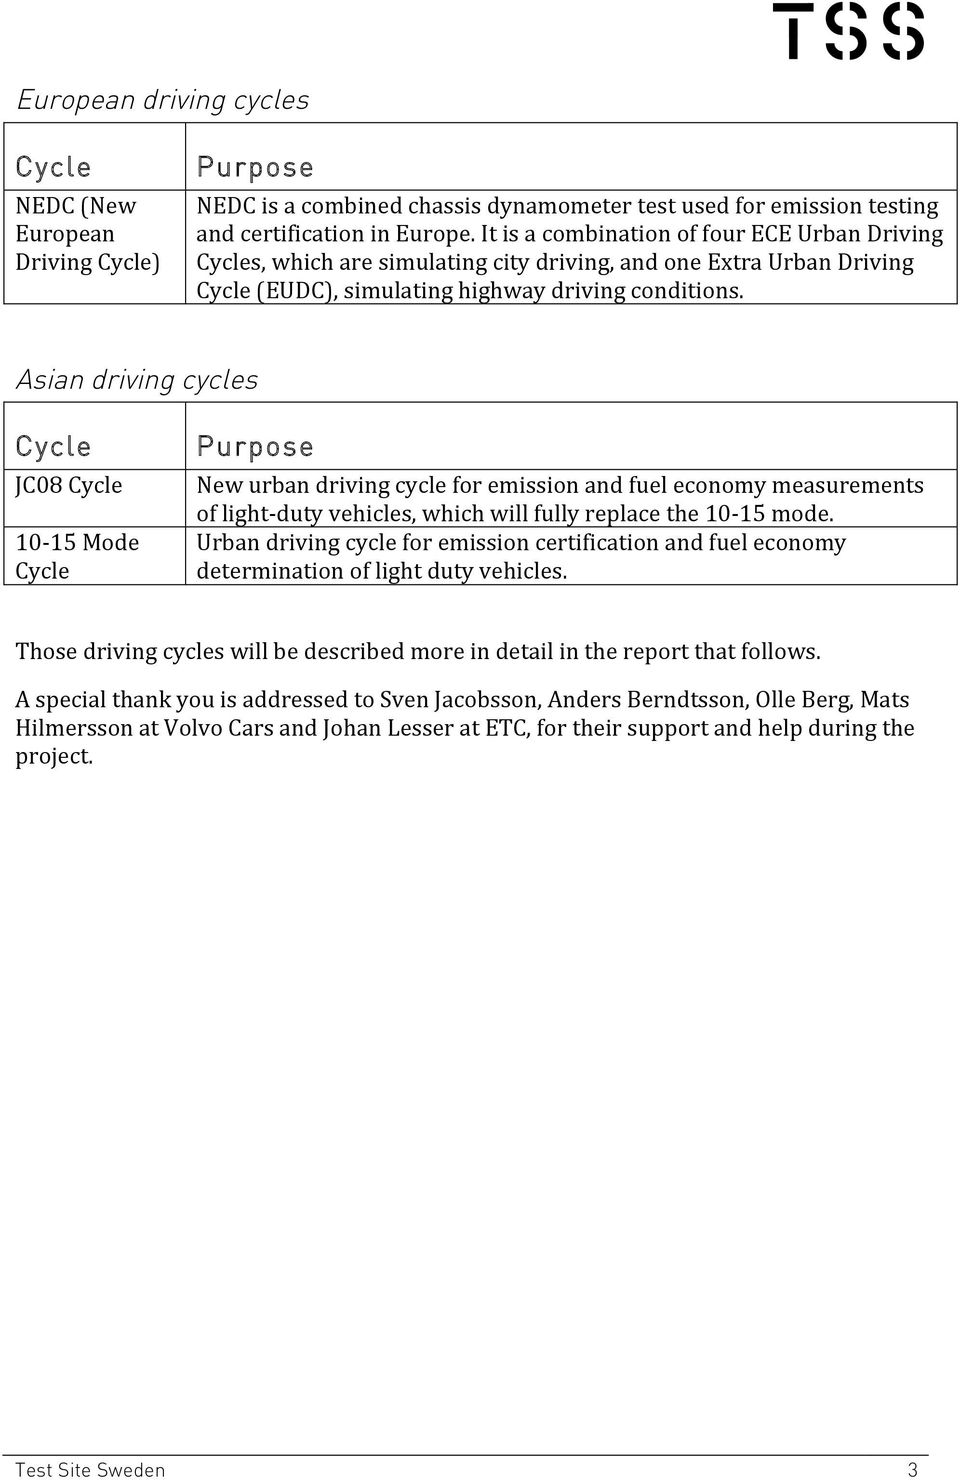 Asian driving cycles Cycle JC08 Cycle 10-15 Mode Cycle Purpose New urban driving cycle for emission and fuel economy measurements of light- duty vehicles, which will fully replace the 10-15 mode.